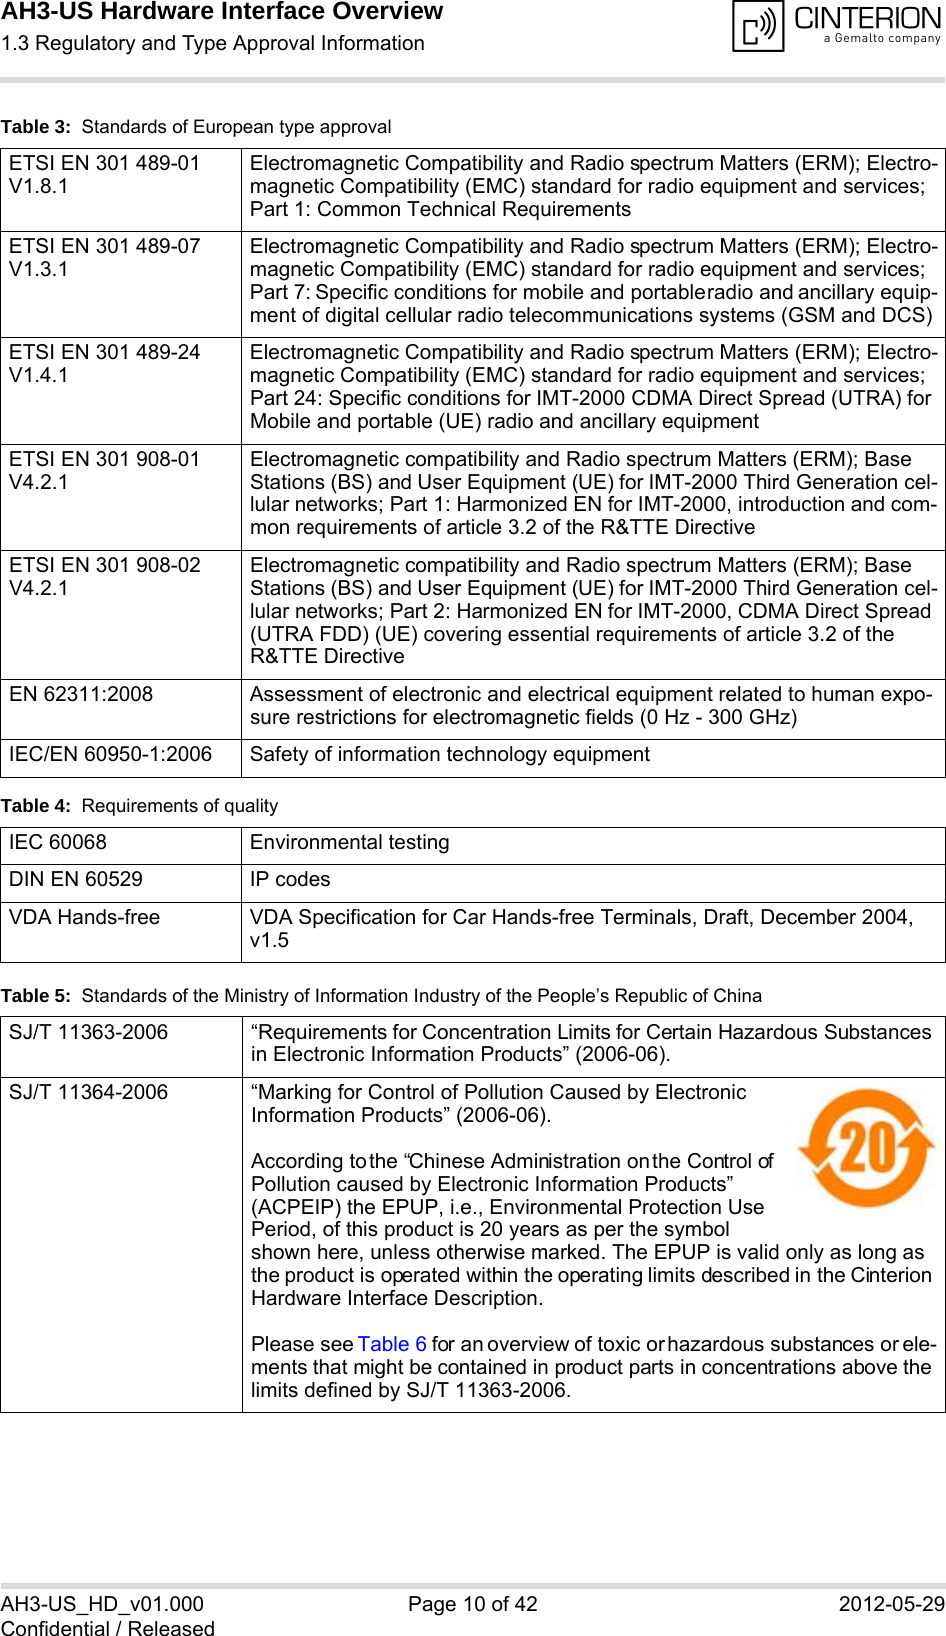 AH3-US Hardware Interface Overview1.3 Regulatory and Type Approval Information14AH3-US_HD_v01.000 Page 10 of 42 2012-05-29Confidential / ReleasedETSI EN 301 489-01 V1.8.1Electromagnetic Compatibility and Radio spectrum Matters (ERM); Electro-magnetic Compatibility (EMC) standard for radio equipment and services; Part 1: Common Technical RequirementsETSI EN 301 489-07 V1.3.1Electromagnetic Compatibility and Radio spectrum Matters (ERM); Electro-magnetic Compatibility (EMC) standard for radio equipment and services; Part 7: Specific conditions for mobile and portable radio and ancillary equip-ment of digital cellular radio telecommunications systems (GSM and DCS)ETSI EN 301 489-24 V1.4.1Electromagnetic Compatibility and Radio spectrum Matters (ERM); Electro-magnetic Compatibility (EMC) standard for radio equipment and services; Part 24: Specific conditions for IMT-2000 CDMA Direct Spread (UTRA) for Mobile and portable (UE) radio and ancillary equipmentETSI EN 301 908-01 V4.2.1Electromagnetic compatibility and Radio spectrum Matters (ERM); Base Stations (BS) and User Equipment (UE) for IMT-2000 Third Generation cel-lular networks; Part 1: Harmonized EN for IMT-2000, introduction and com-mon requirements of article 3.2 of the R&amp;TTE DirectiveETSI EN 301 908-02 V4.2.1Electromagnetic compatibility and Radio spectrum Matters (ERM); Base Stations (BS) and User Equipment (UE) for IMT-2000 Third Generation cel-lular networks; Part 2: Harmonized EN for IMT-2000, CDMA Direct Spread (UTRA FDD) (UE) covering essential requirements of article 3.2 of the R&amp;TTE DirectiveEN 62311:2008 Assessment of electronic and electrical equipment related to human expo-sure restrictions for electromagnetic fields (0 Hz - 300 GHz)IEC/EN 60950-1:2006 Safety of information technology equipmentTable 4:  Requirements of qualityIEC 60068 Environmental testingDIN EN 60529 IP codesVDA Hands-free  VDA Specification for Car Hands-free Terminals, Draft, December 2004, v1.5Table 5:  Standards of the Ministry of Information Industry of the People’s Republic of ChinaSJ/T 11363-2006  “Requirements for Concentration Limits for Certain Hazardous Substances in Electronic Information Products” (2006-06).SJ/T 11364-2006 “Marking for Control of Pollution Caused by Electronic Information Products” (2006-06).According to the “Chinese Administration on the Control of Pollution caused by Electronic Information Products” (ACPEIP) the EPUP, i.e., Environmental Protection Use Period, of this product is 20 years as per the symbol shown here, unless otherwise marked. The EPUP is valid only as long as the product is operated within the operating limits described in the Cinterion Hardware Interface Description.Please see Table 6 for an overview of toxic or hazardous substances or ele-ments that might be contained in product parts in concentrations above the limits defined by SJ/T 11363-2006. Table 3:  Standards of European type approval